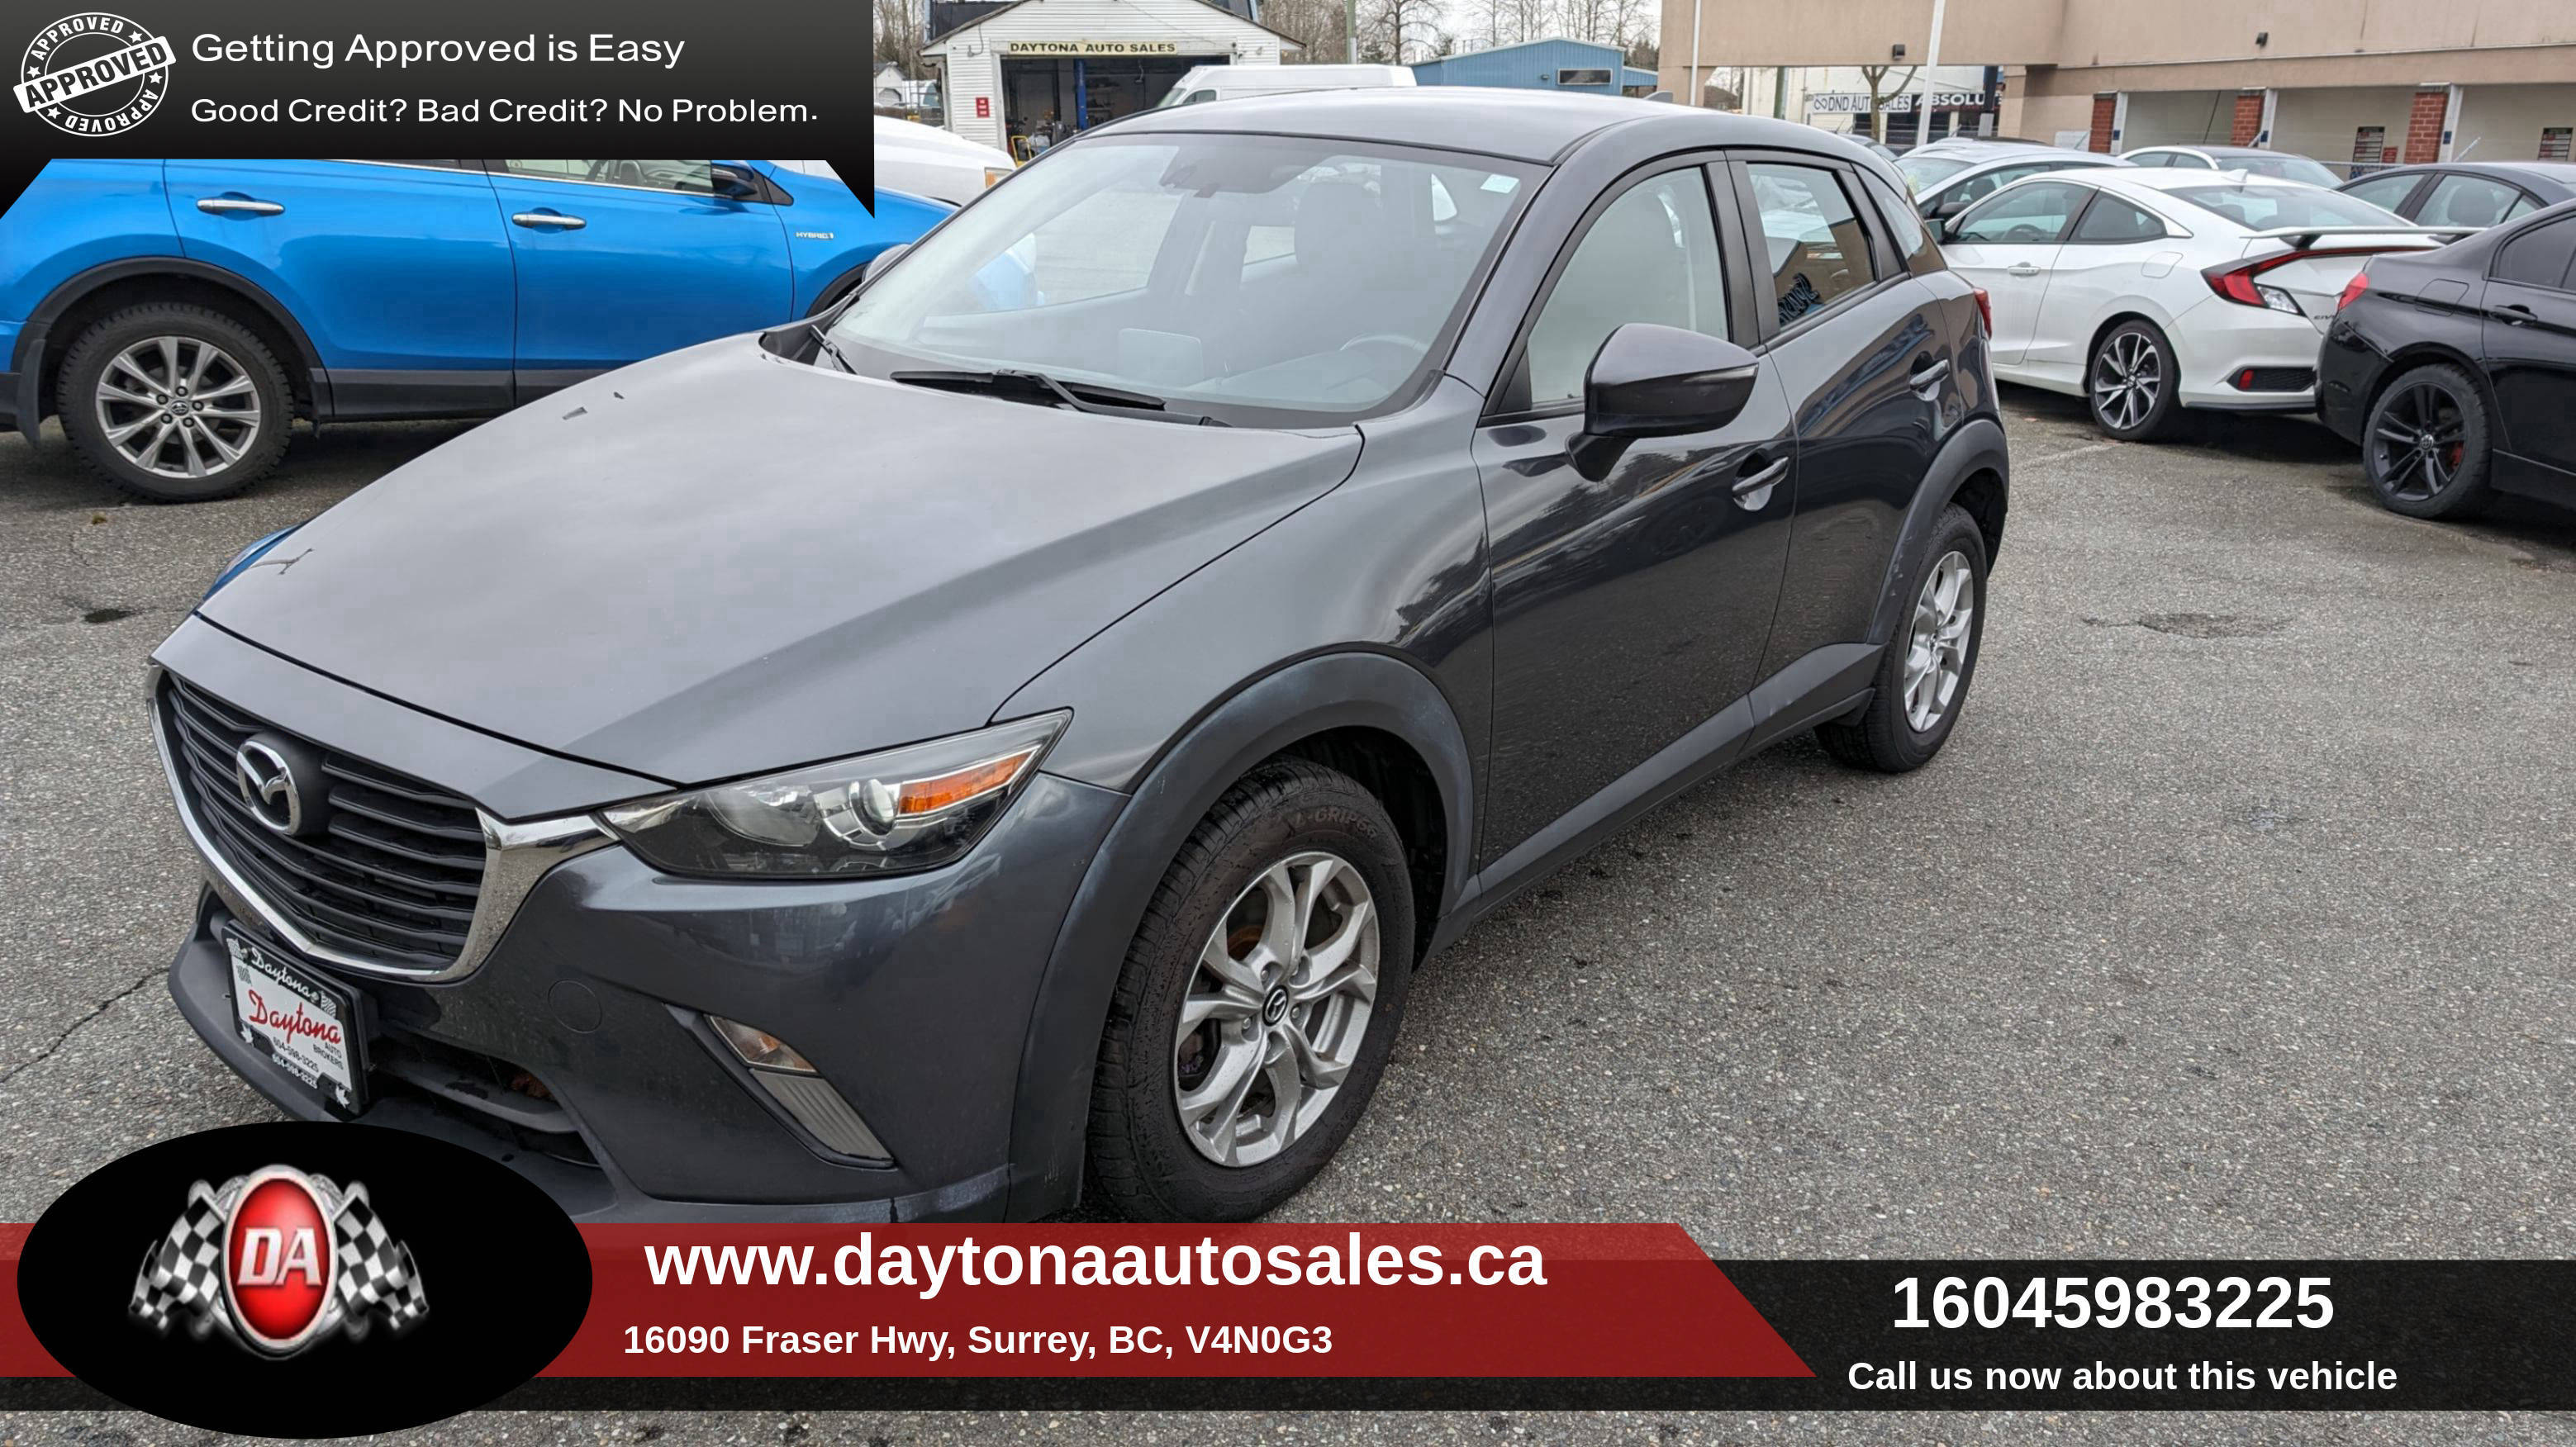 2017 Mazda CX-3 AWD 4dr GS, one owner, no accidents, we finance,